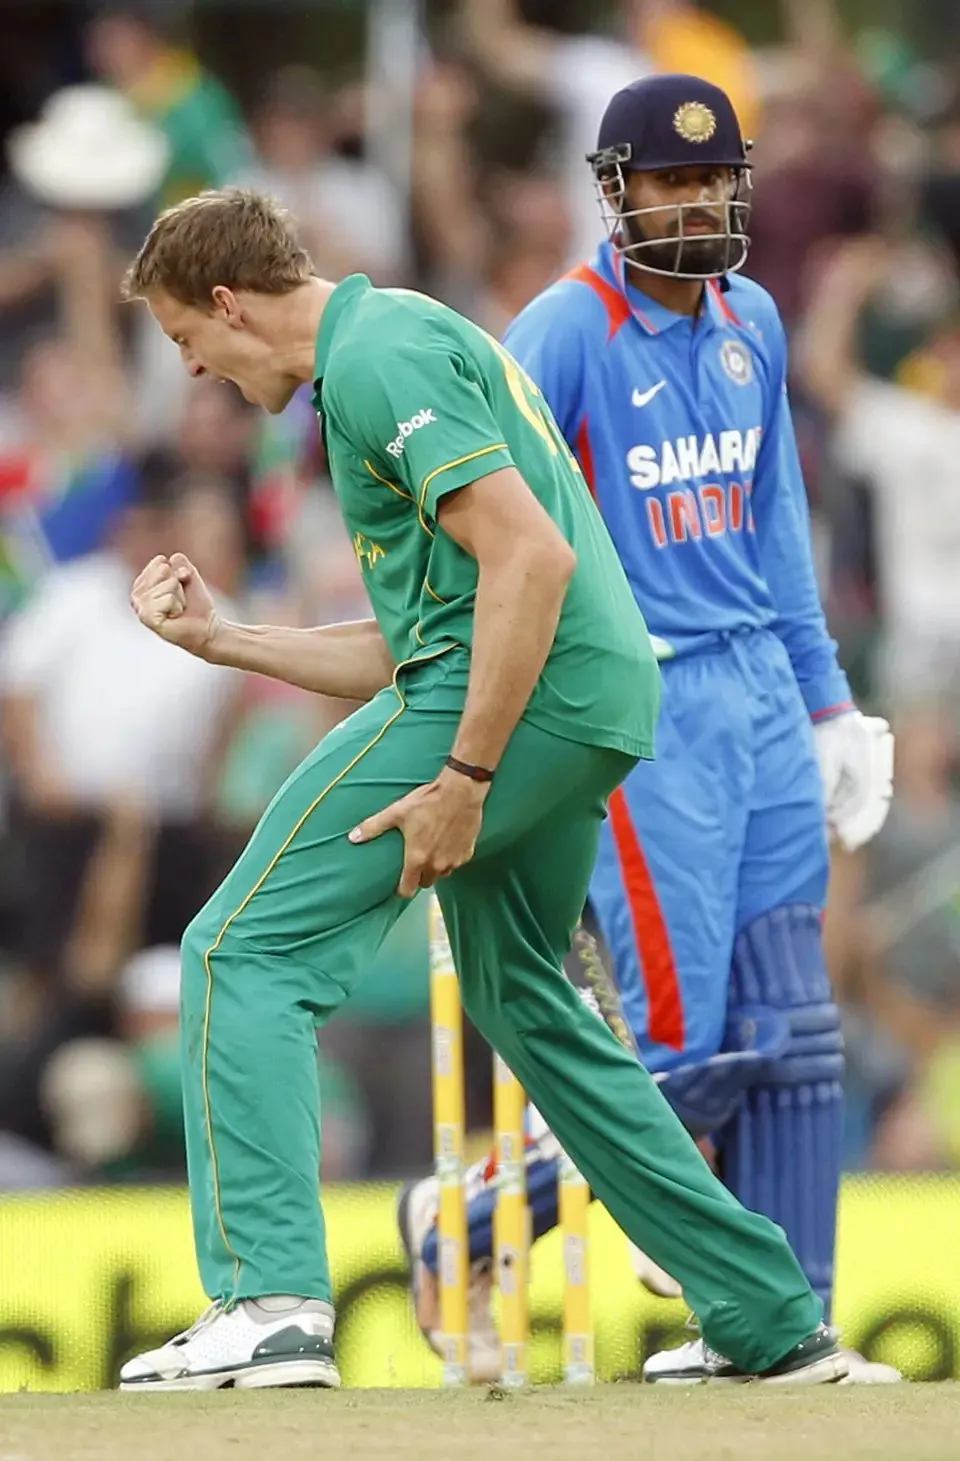 Morne Morkel after ending Yusuf Pathan's monstrous hitting during the SA vs IND 5th ODI match in 2011  Image - Associated Press